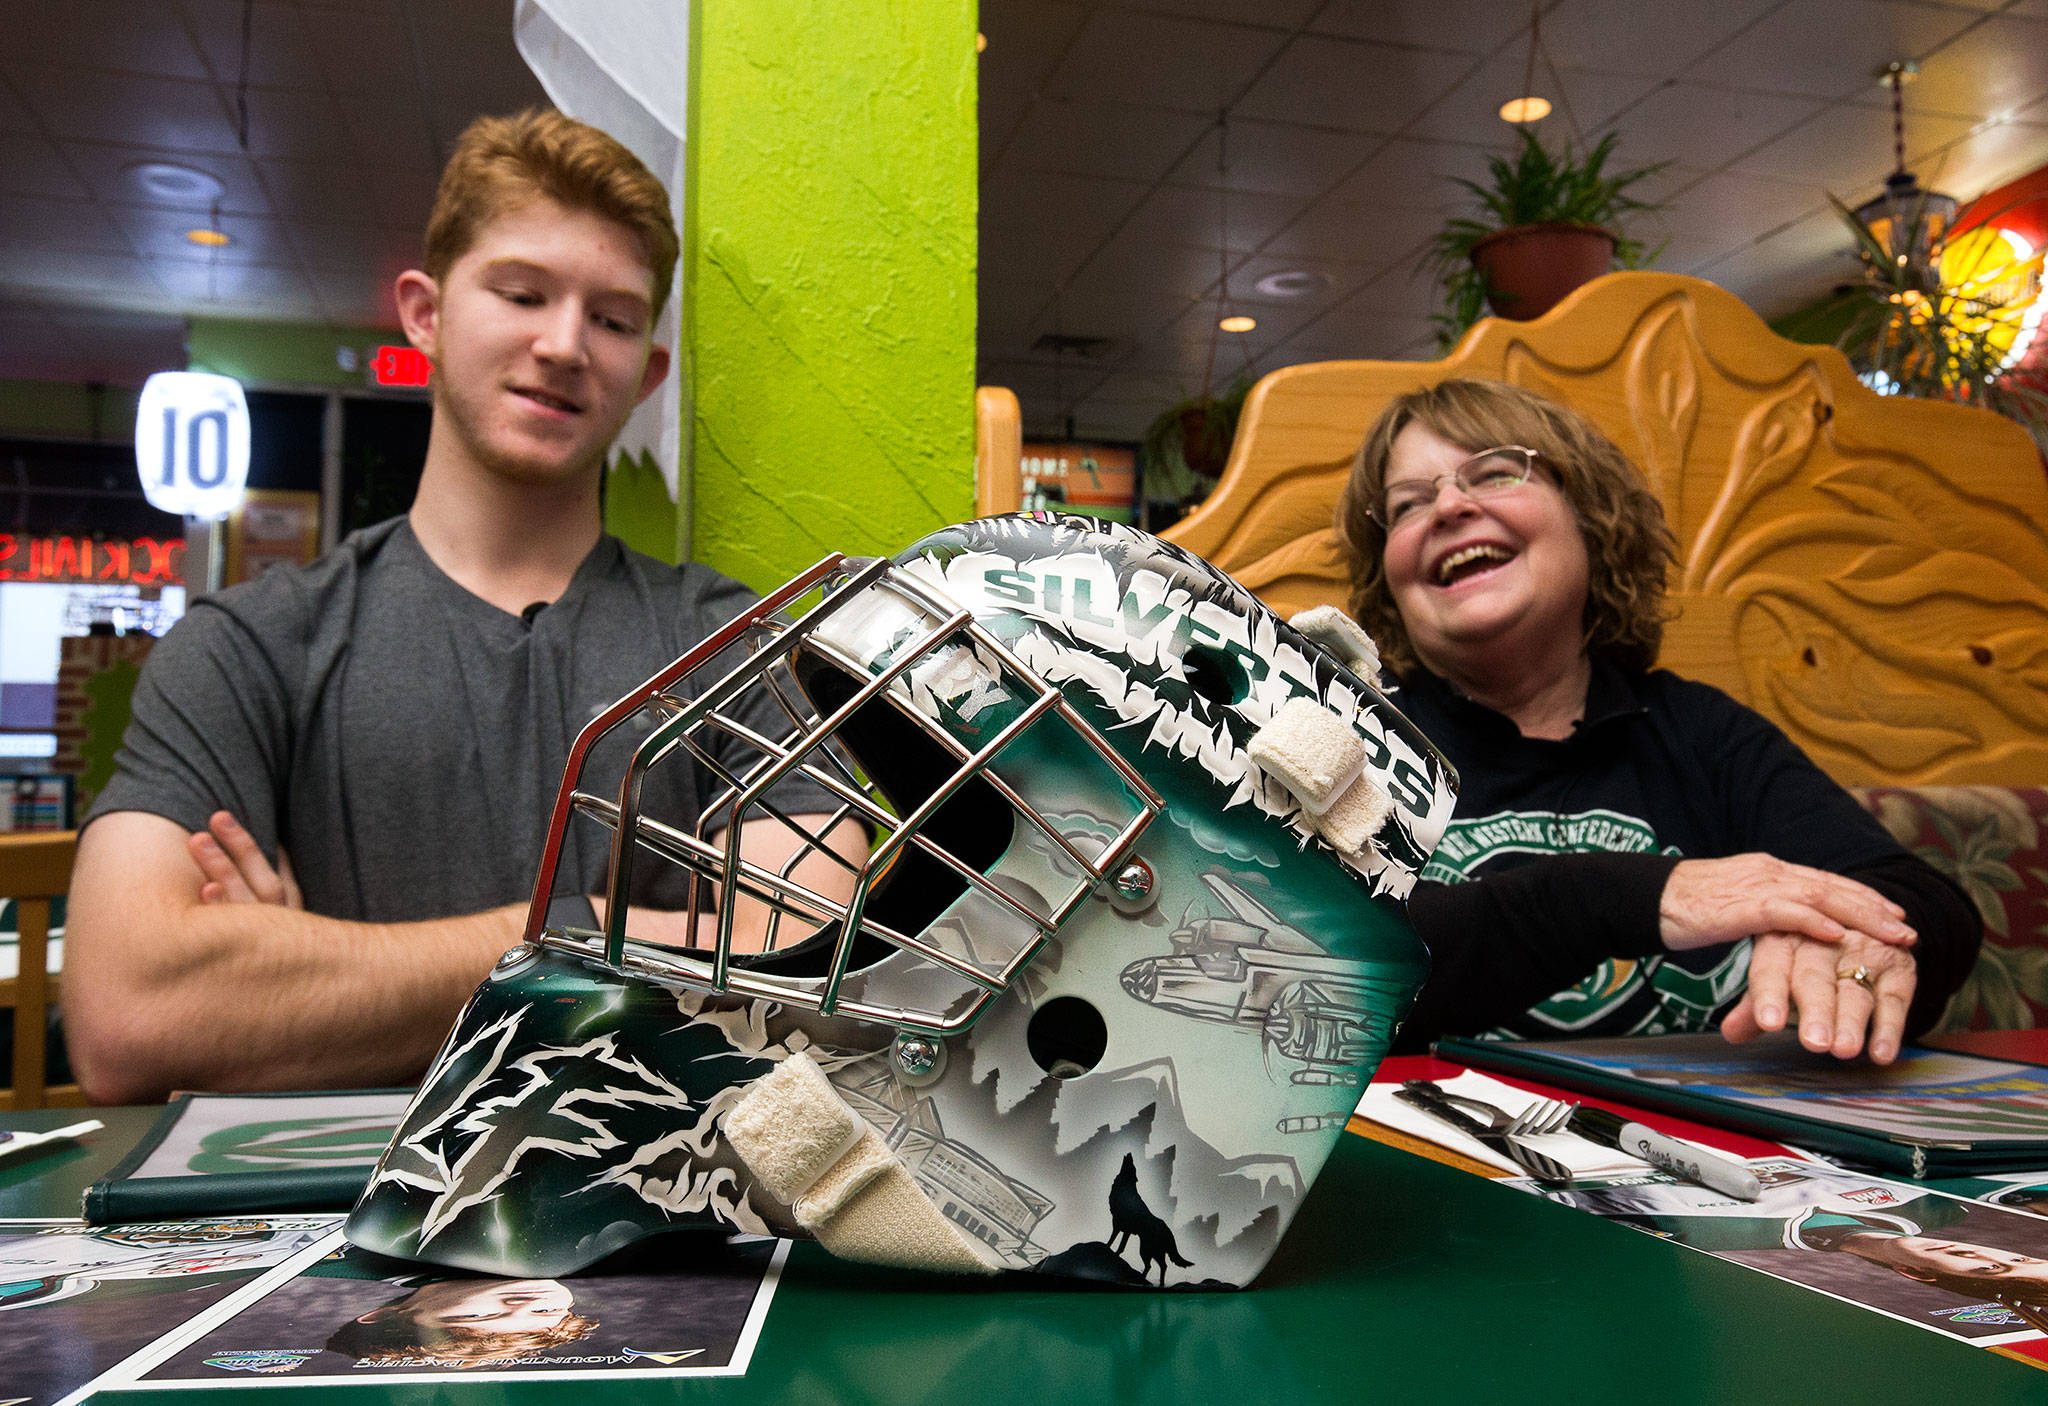 Nancy Wilds, right, laughs with Silvertips goalie Dustin Wolf over dinner on Monday, Oct. 28, 2019 in Everett, Wash. Wilds was the design winner for Wolf’s mask and was treated with dinner with the goalie. (Andy Bronson / The Herald)